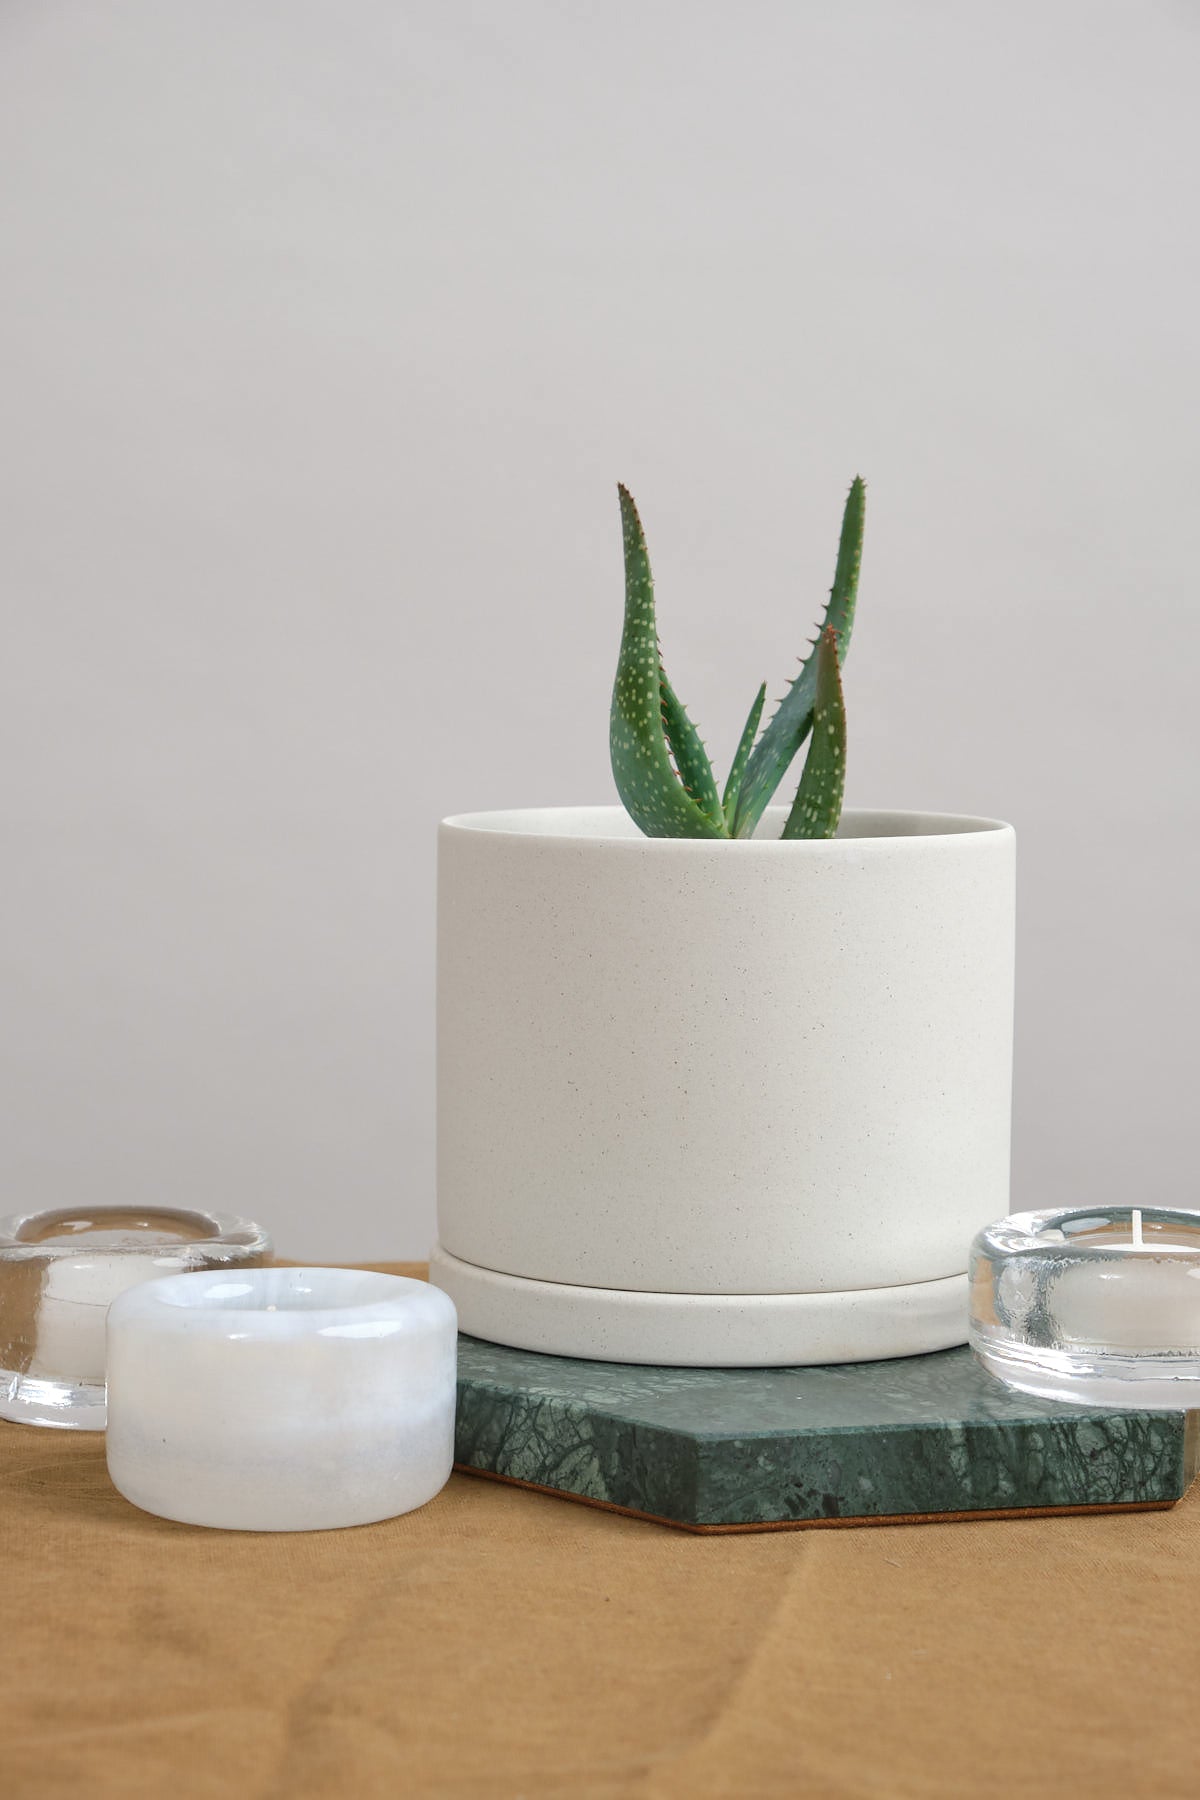 Kinto 5 inch Porcelain Plant Pot in Earth Grey 